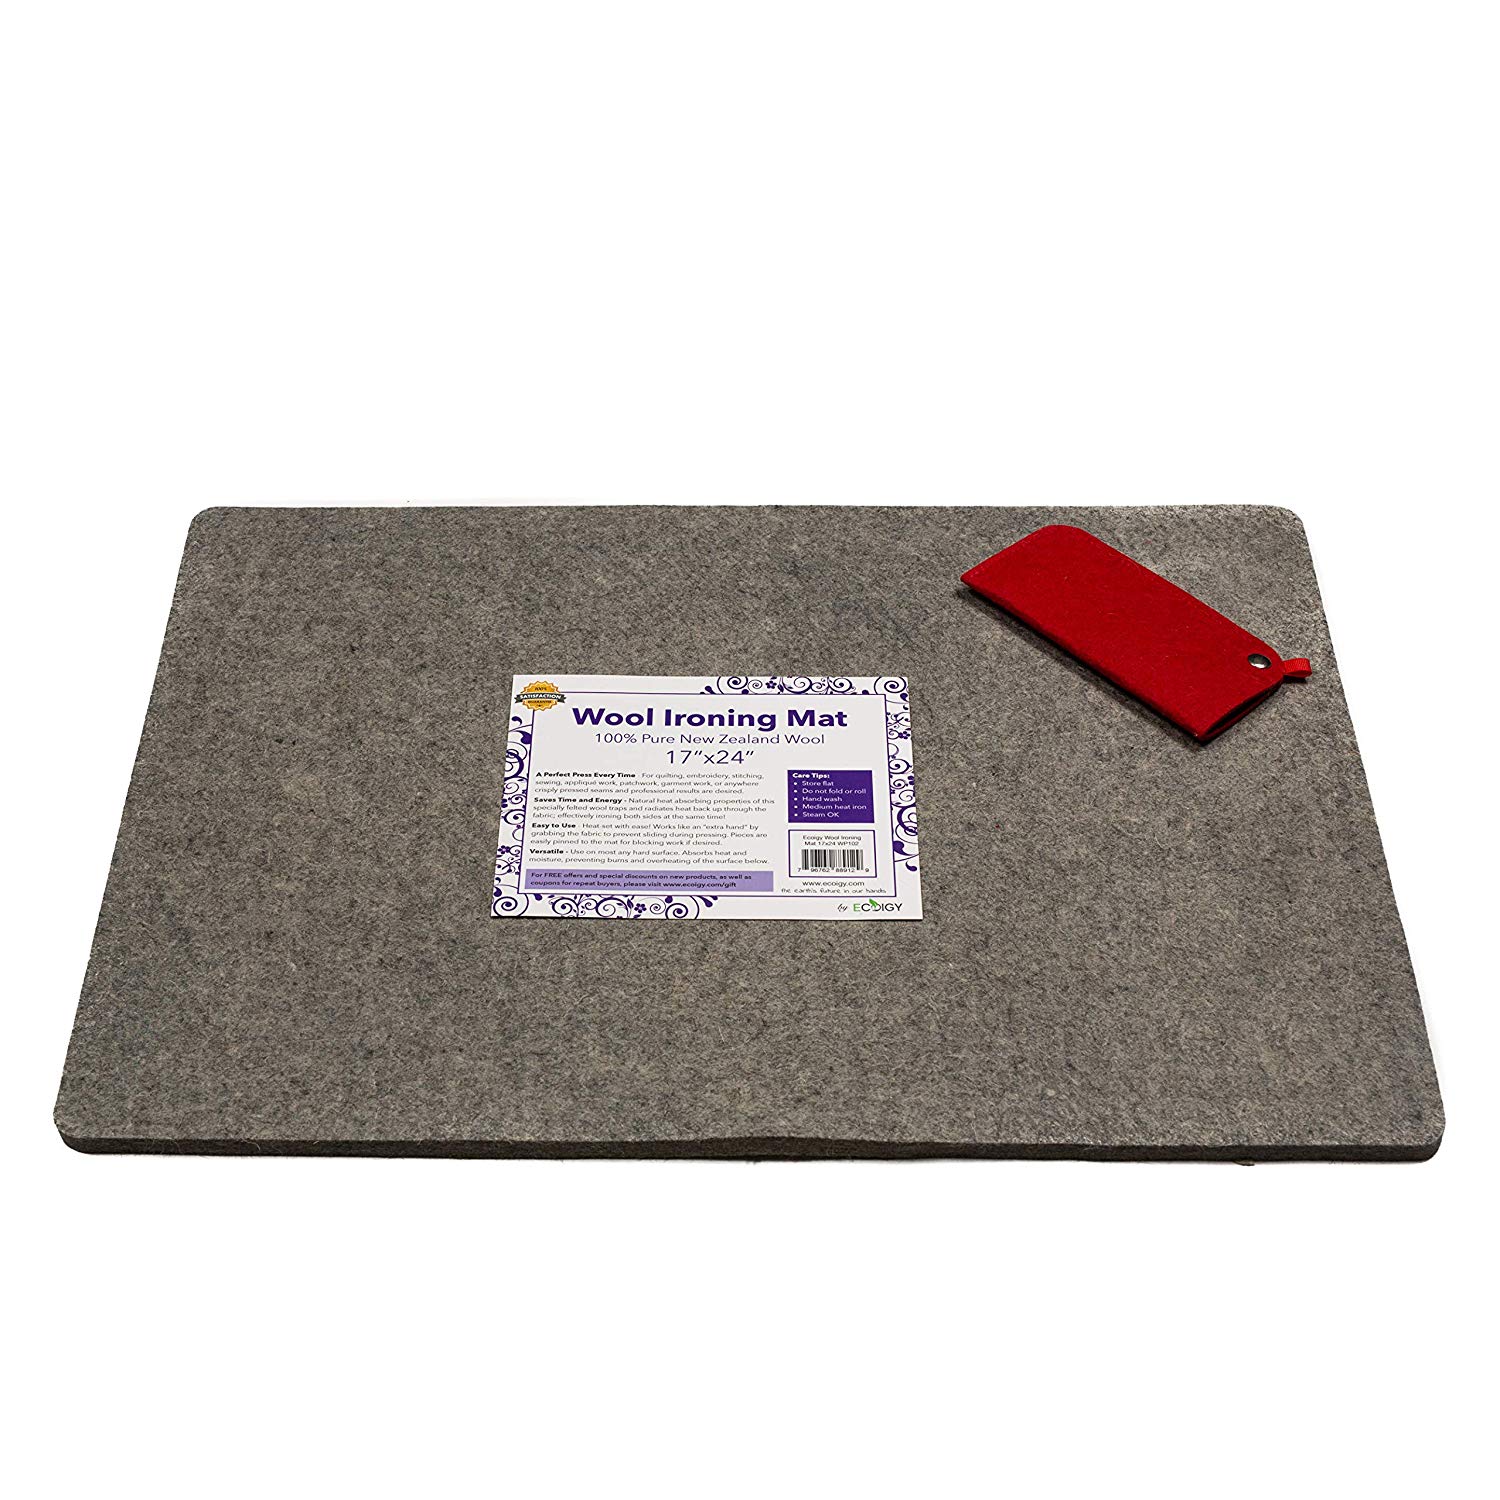 Wool Pressing Mat For Quilting,Wool Pressing Mat,Wool Ironing Mat Wool Pressing Pad Perfect Ironing Station for Quilting 